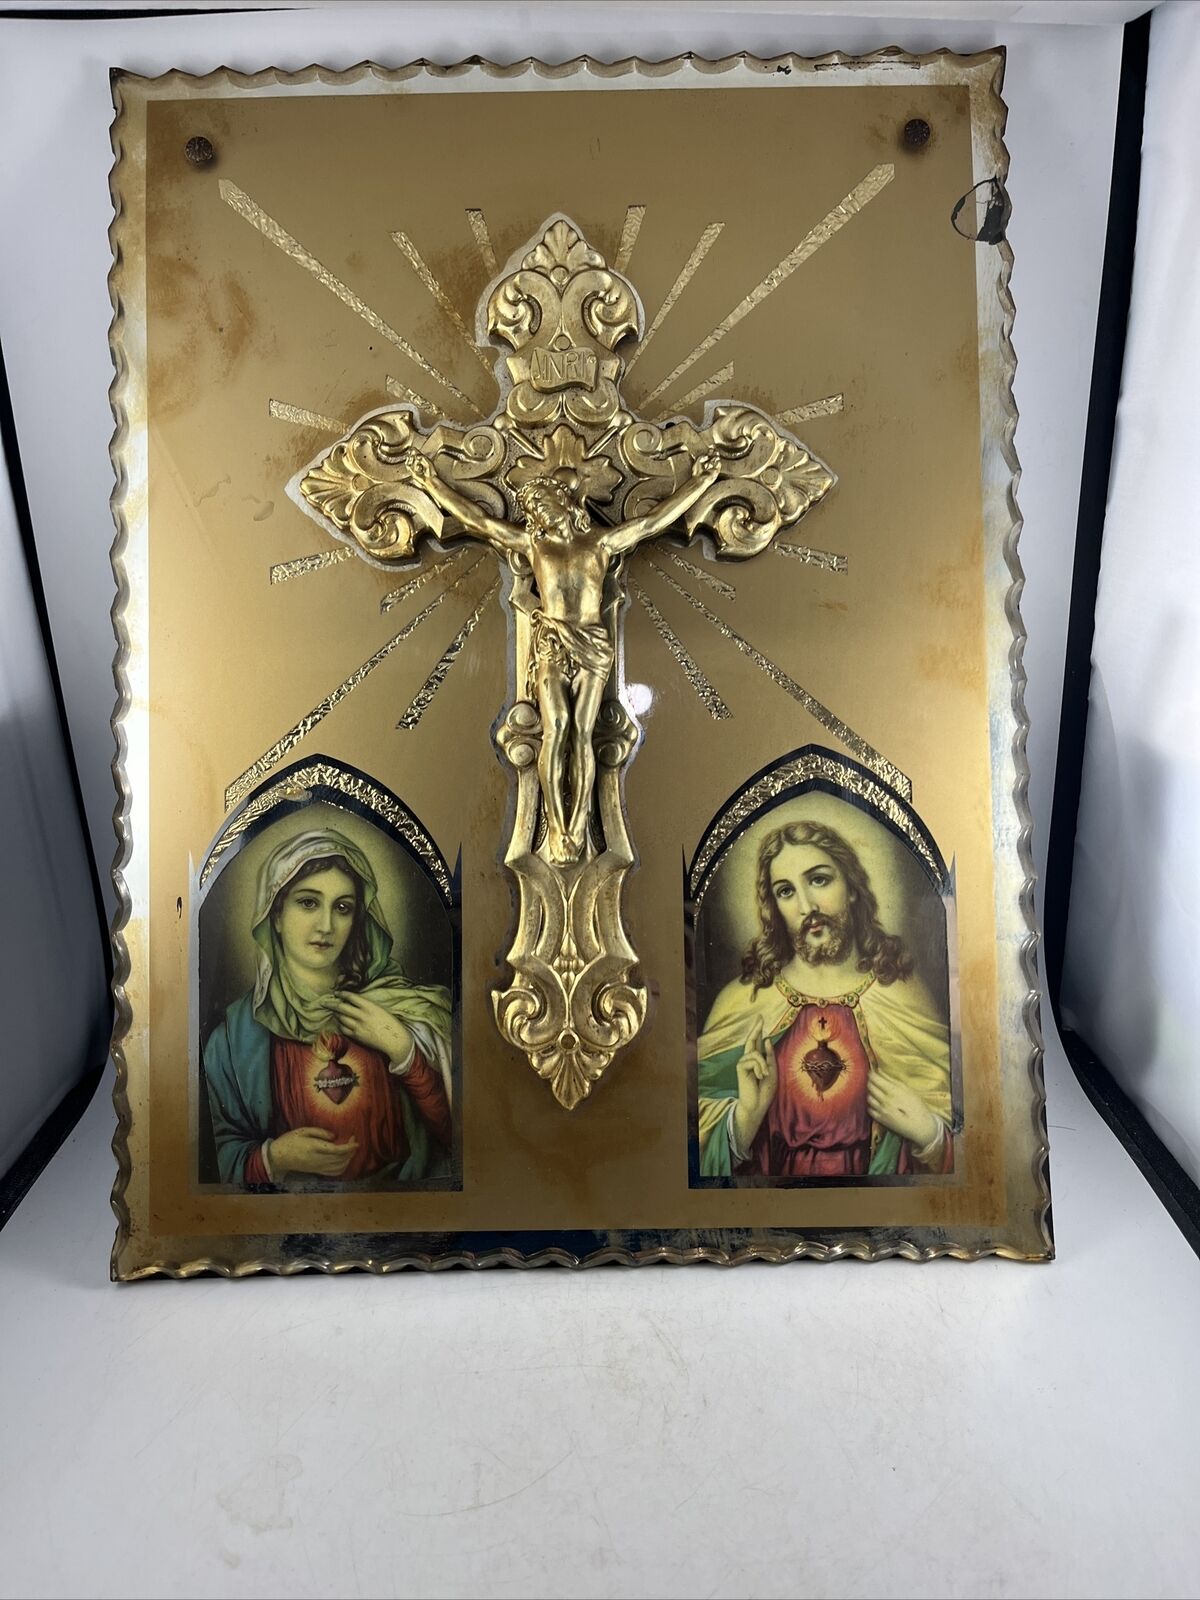 OLD VINTAGE MARY JESUS CRUSIFIX RELIGIOUS CUT GLASS WALL HANGING 18”x 12” Tall